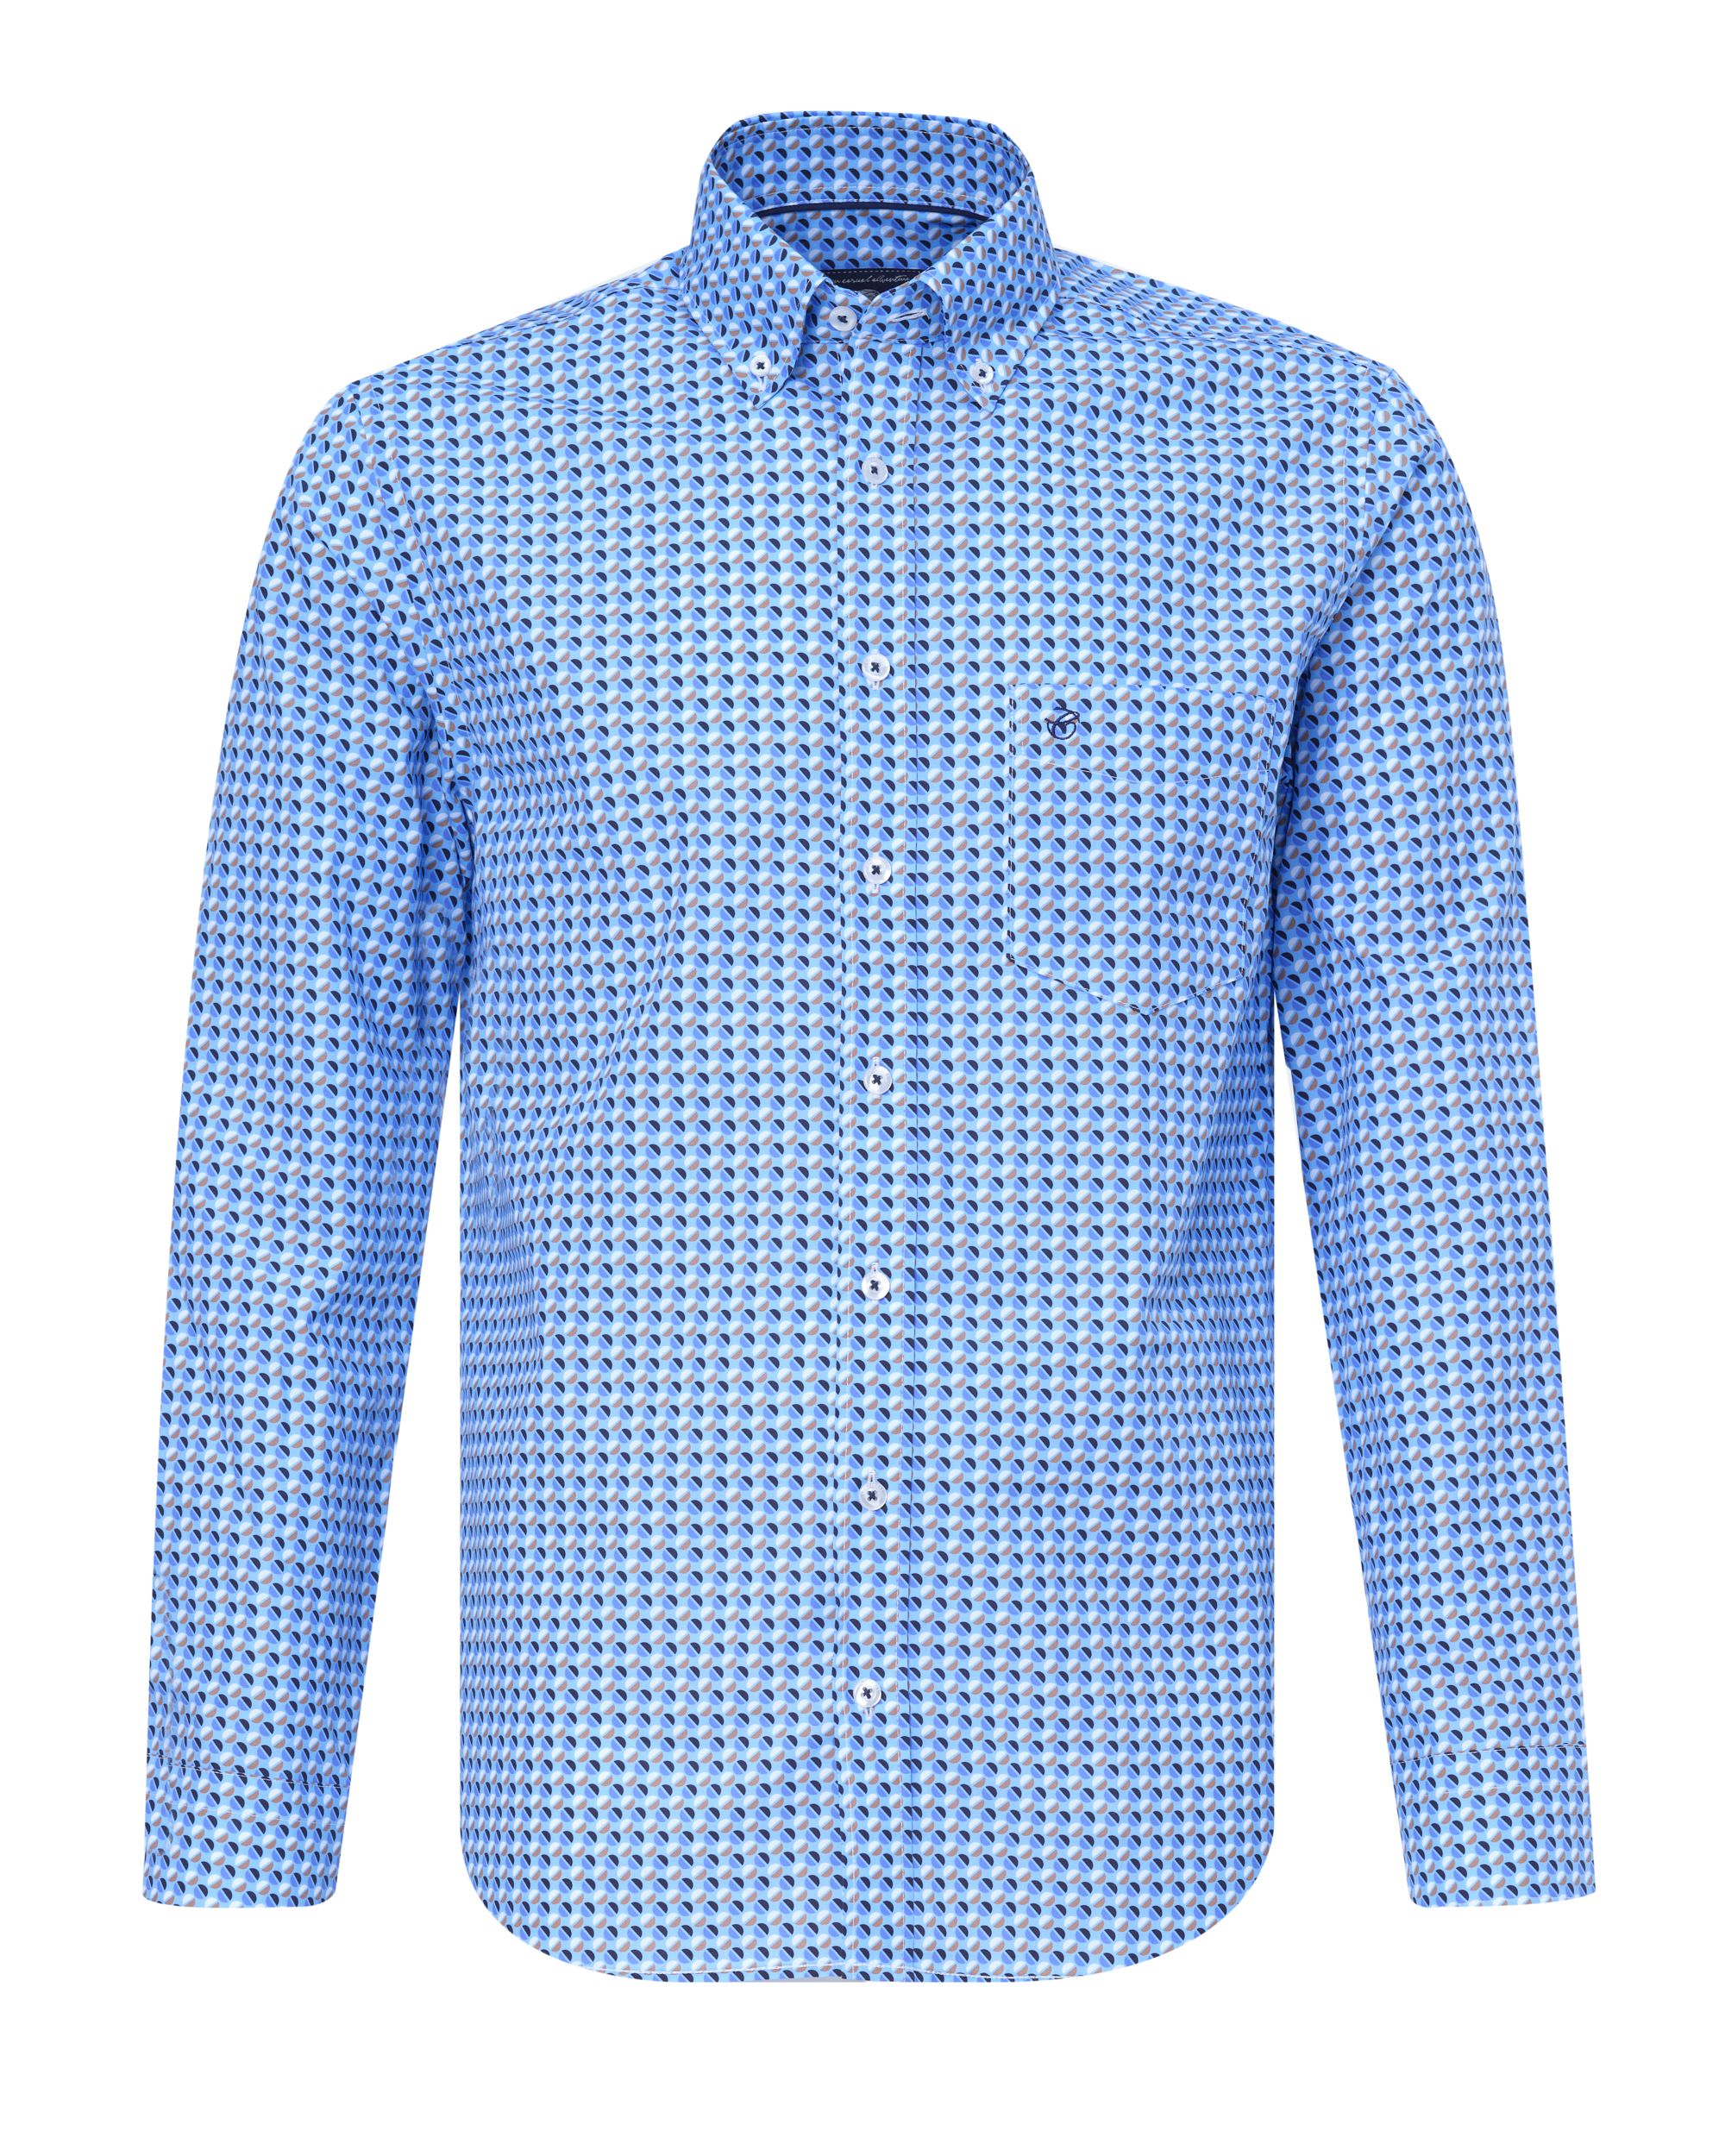 Campbell Classic Casual Overhemd LM Blauw dessin 084664-001-L